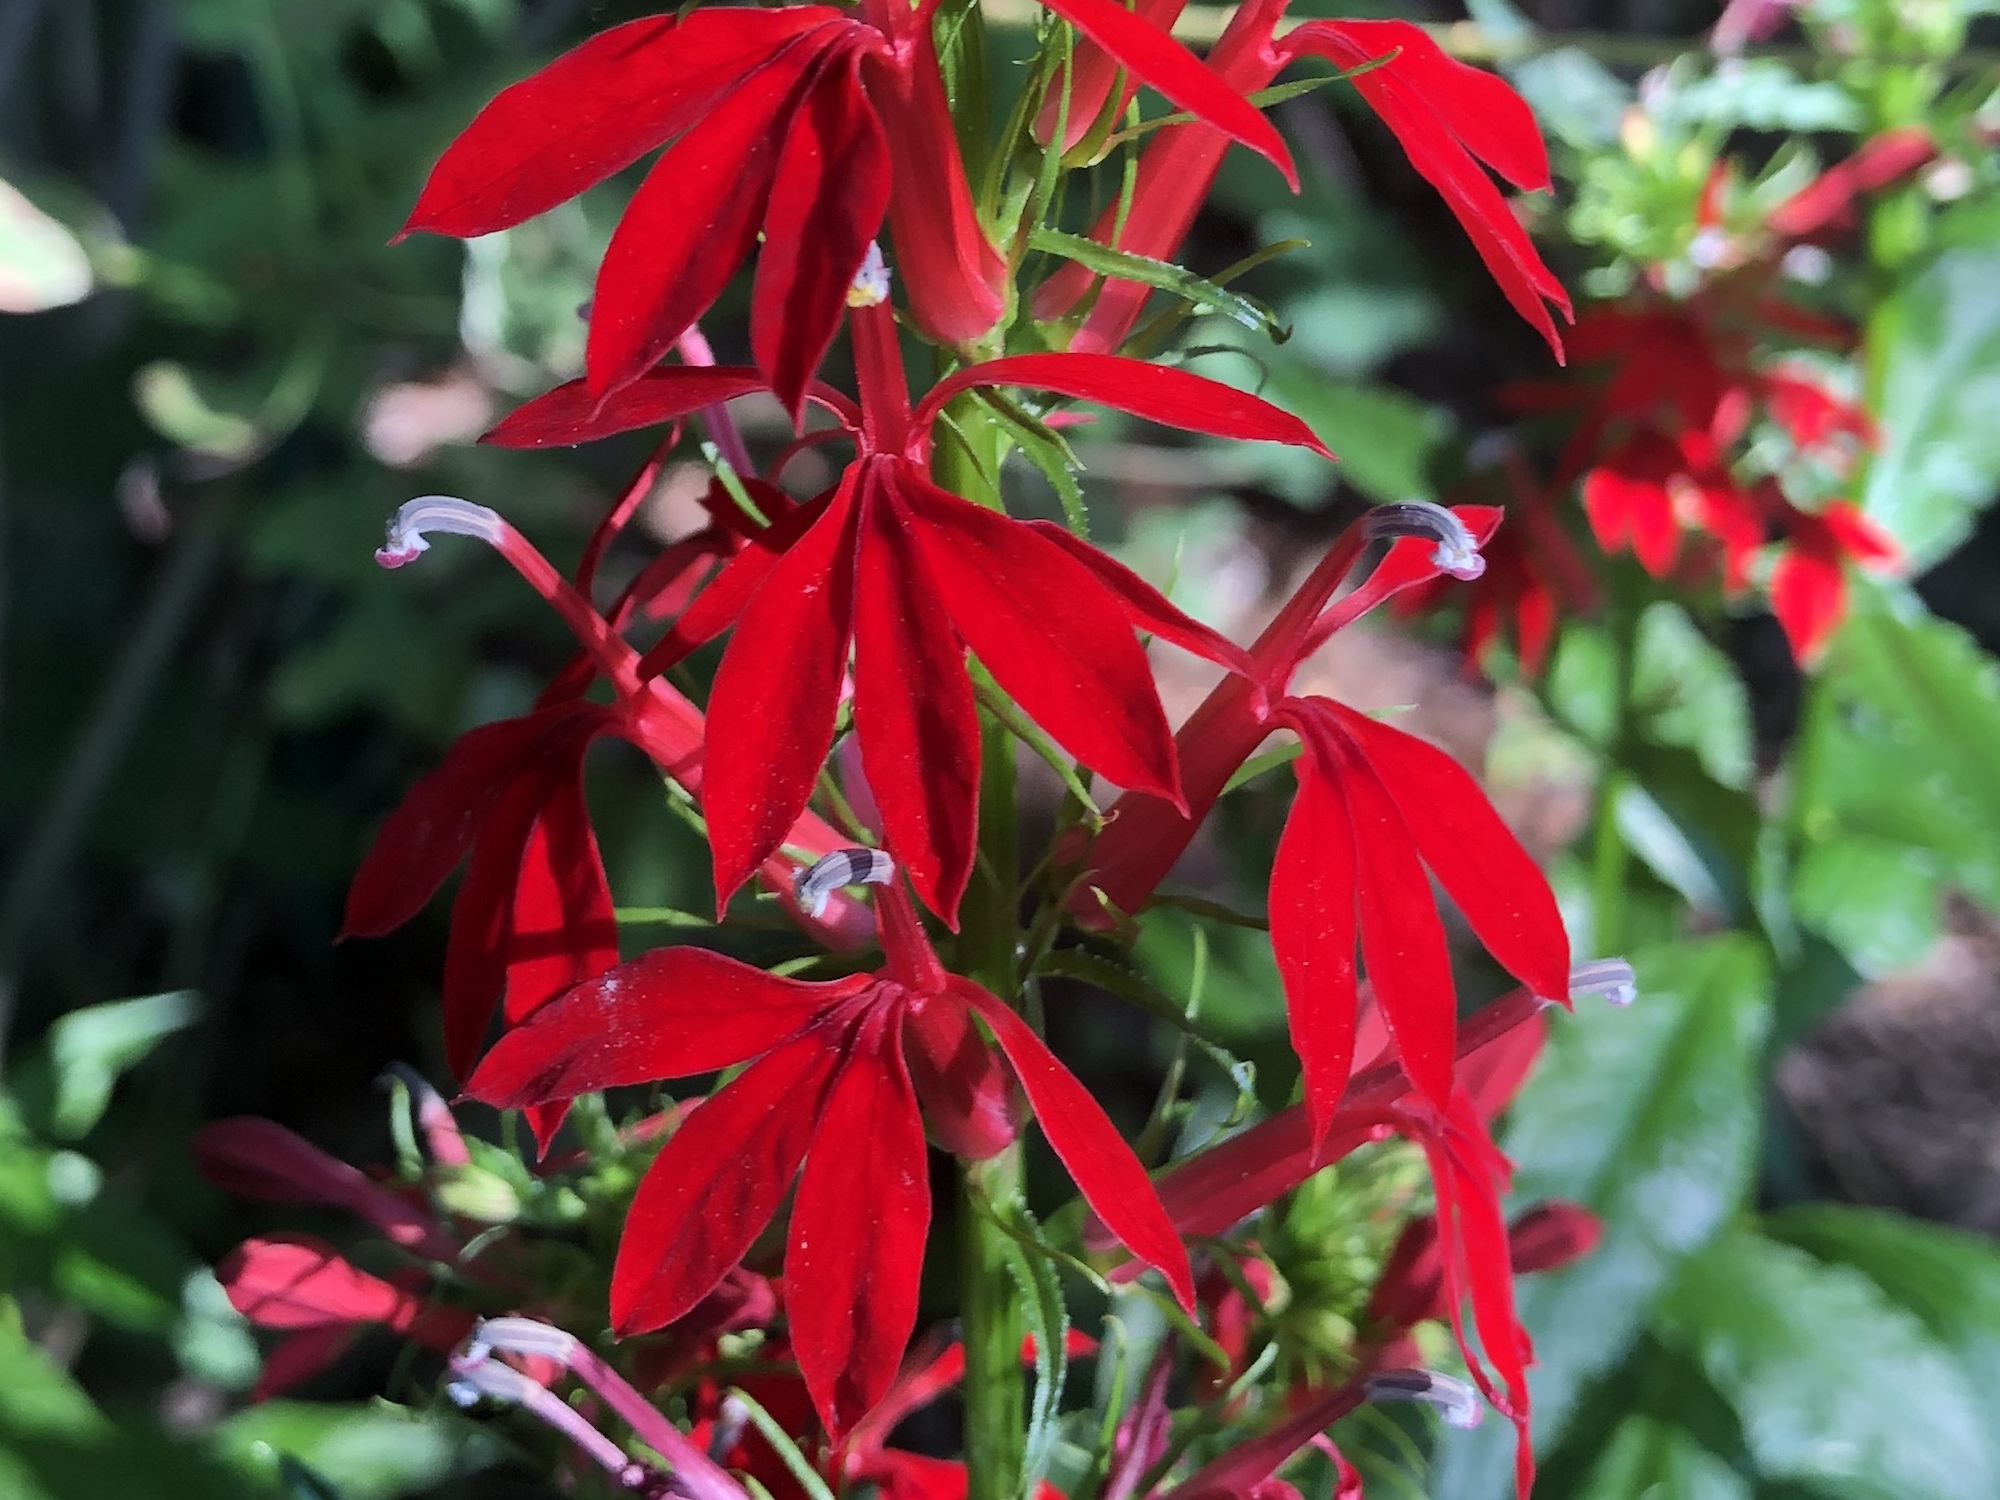 Cardinal Flower in a Nakoma garden in Madison, Wisconsin on July 24, 2020.